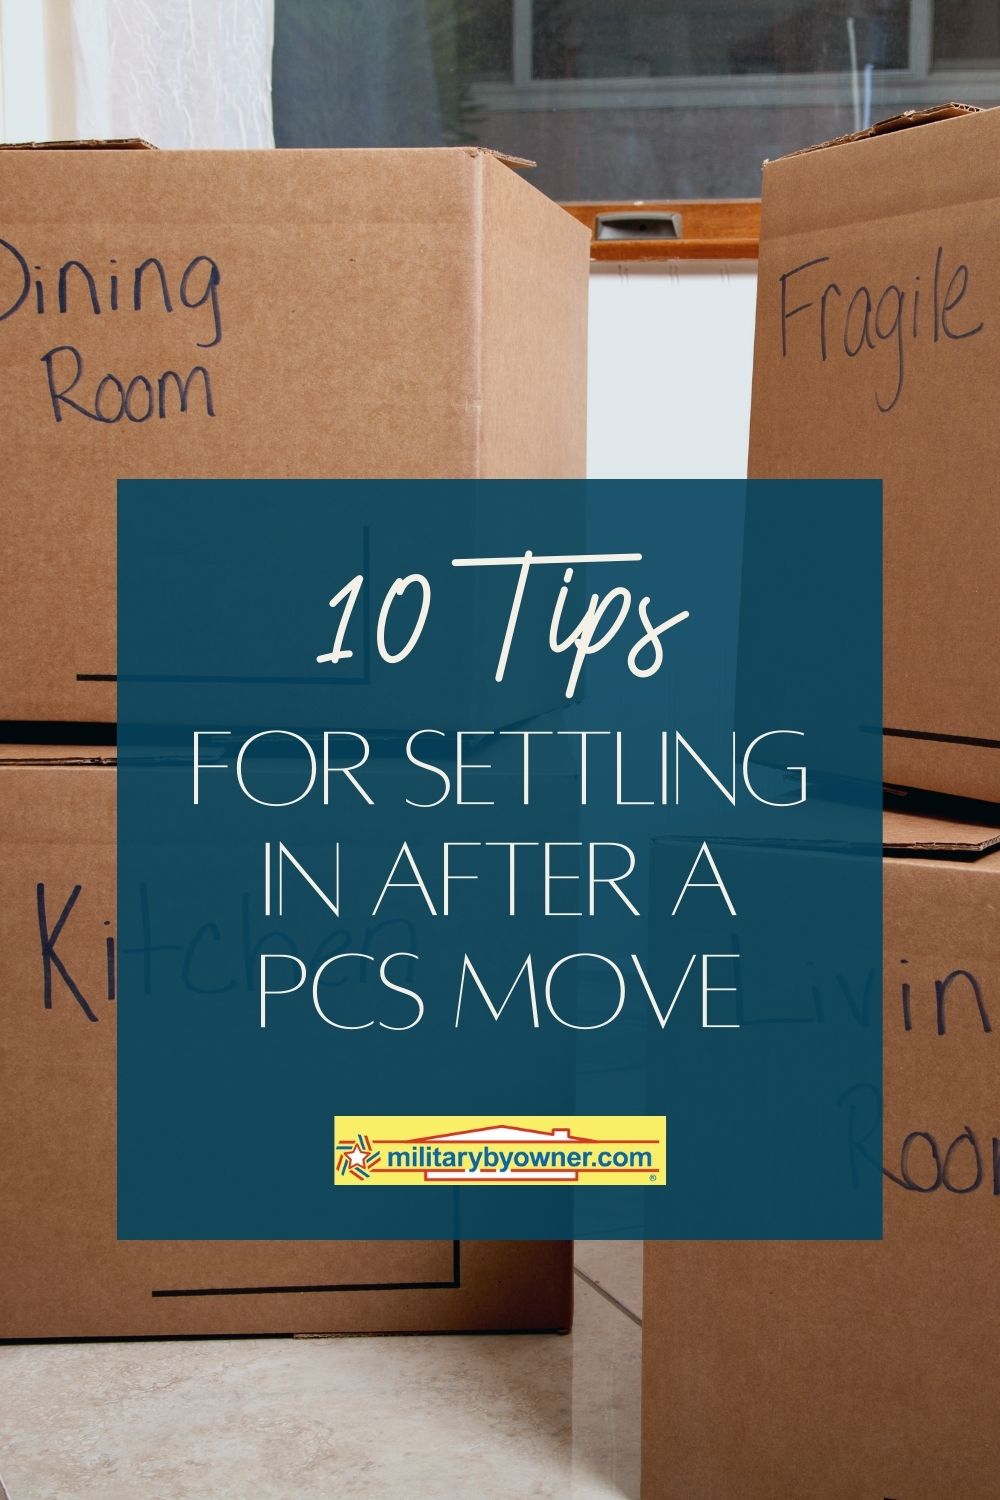 10_Tips_for_Settling_in_After_a_PCS_Move